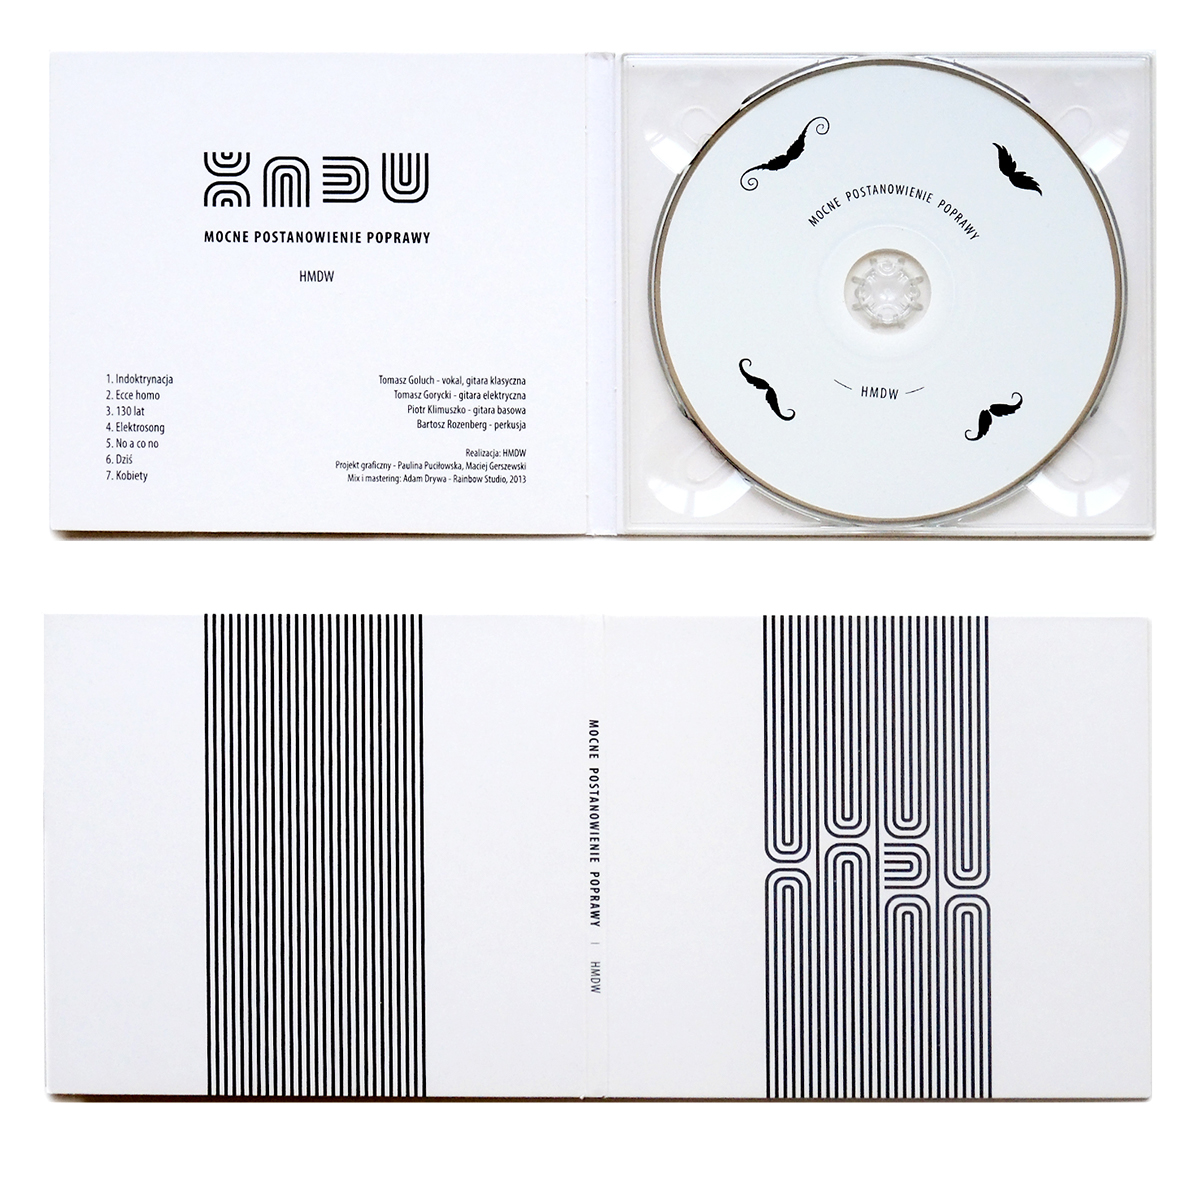 logo cd cover Album rock stripes enigmatic surprise moustache b&w black and white digipack package vector